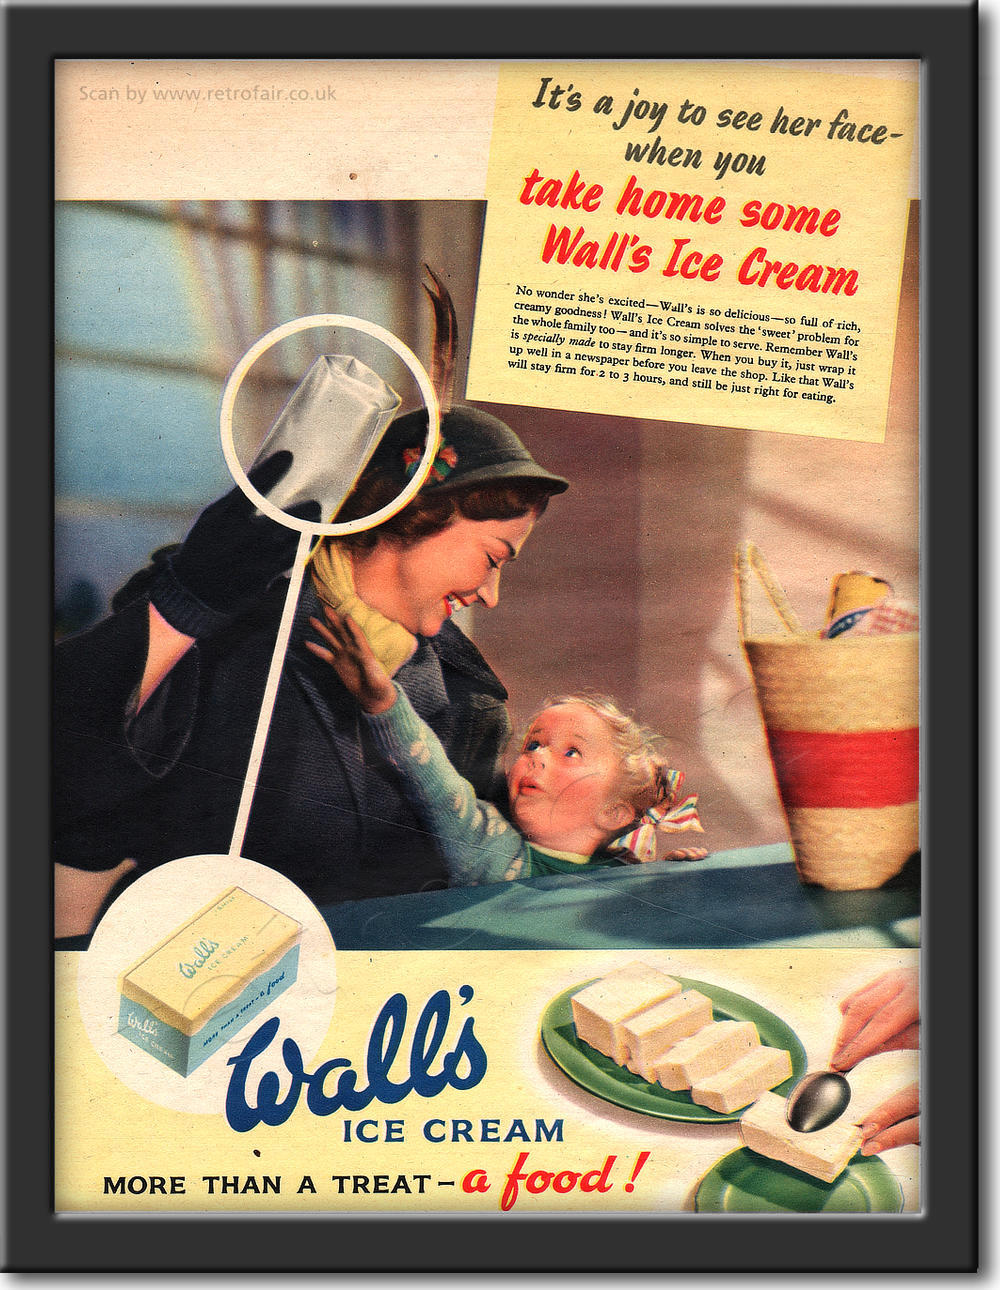  1951 Wall's Ice Cream - framed preview retro